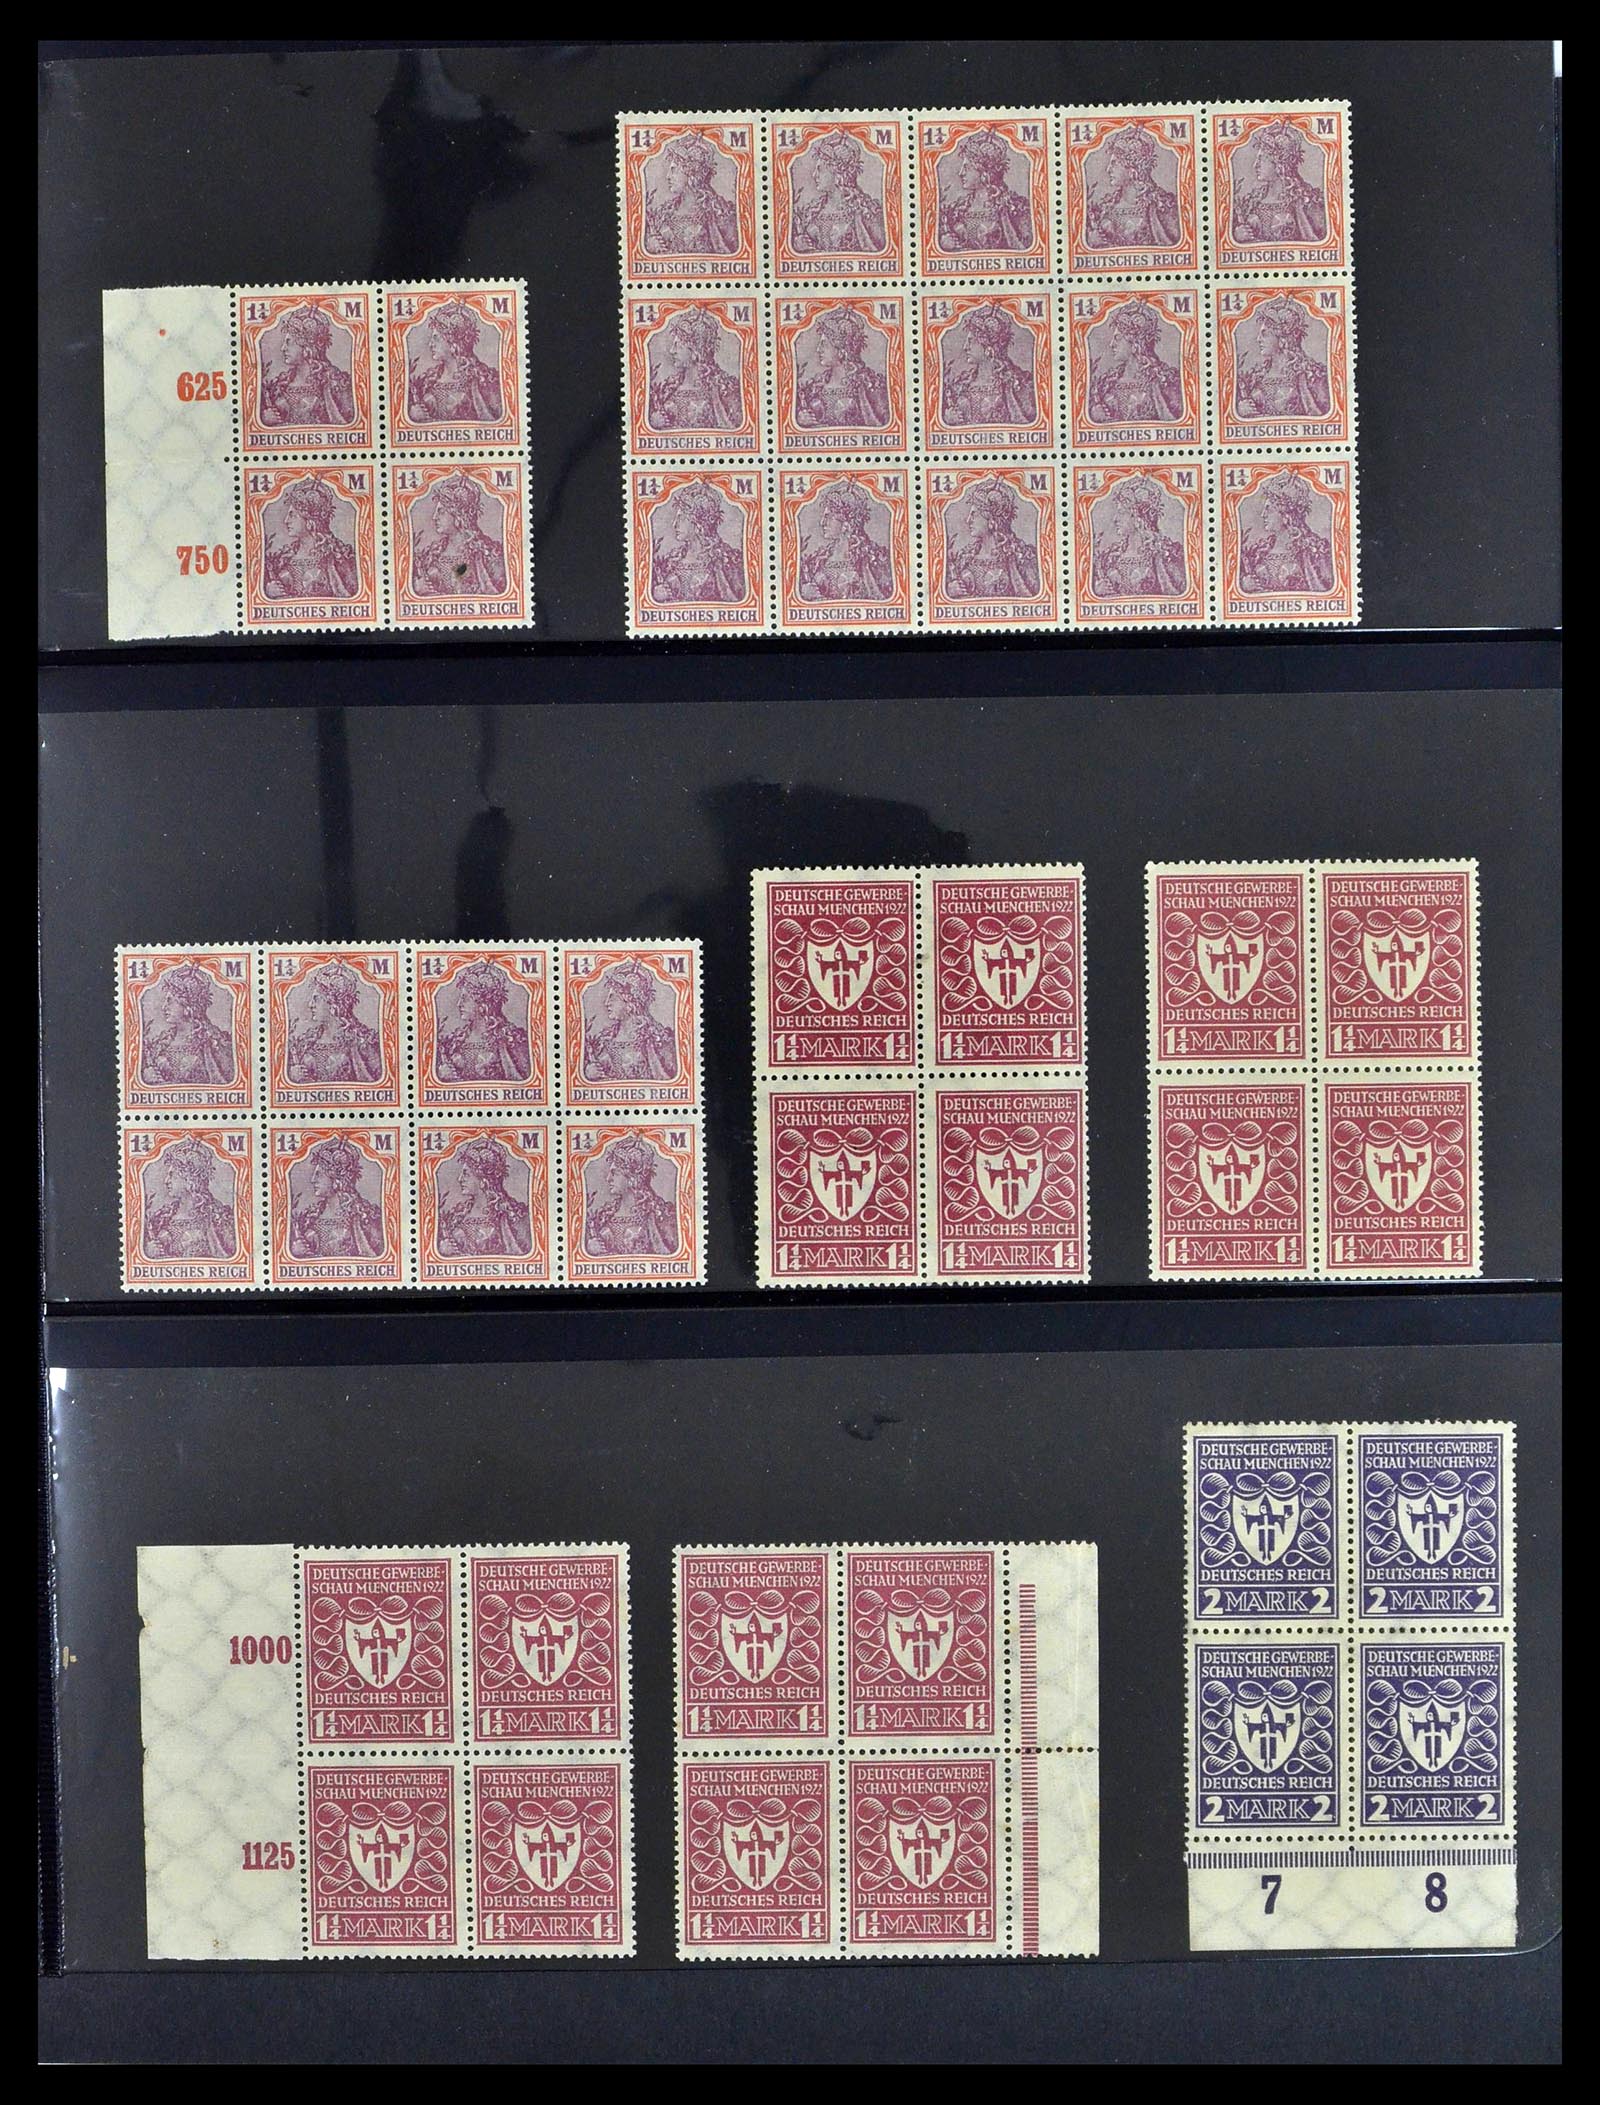 39255 0011 - Stamp collection 39255 German Reich MNH blocks of 4.